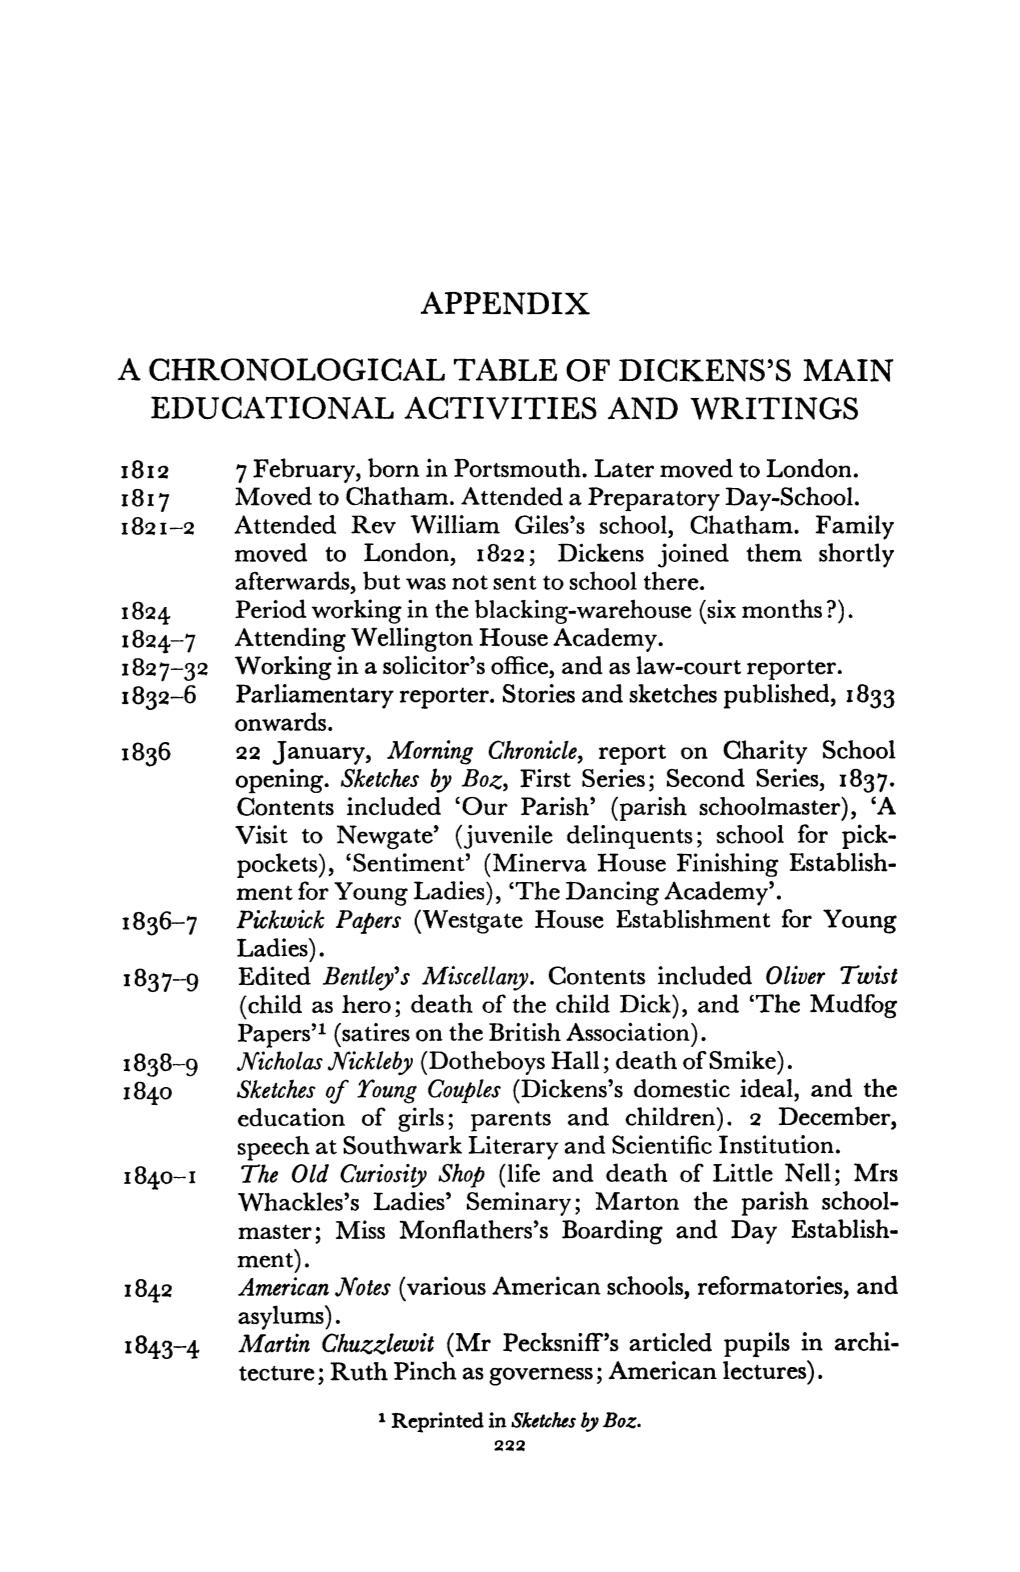 Appendix a Chronological Table of Dickens's Main